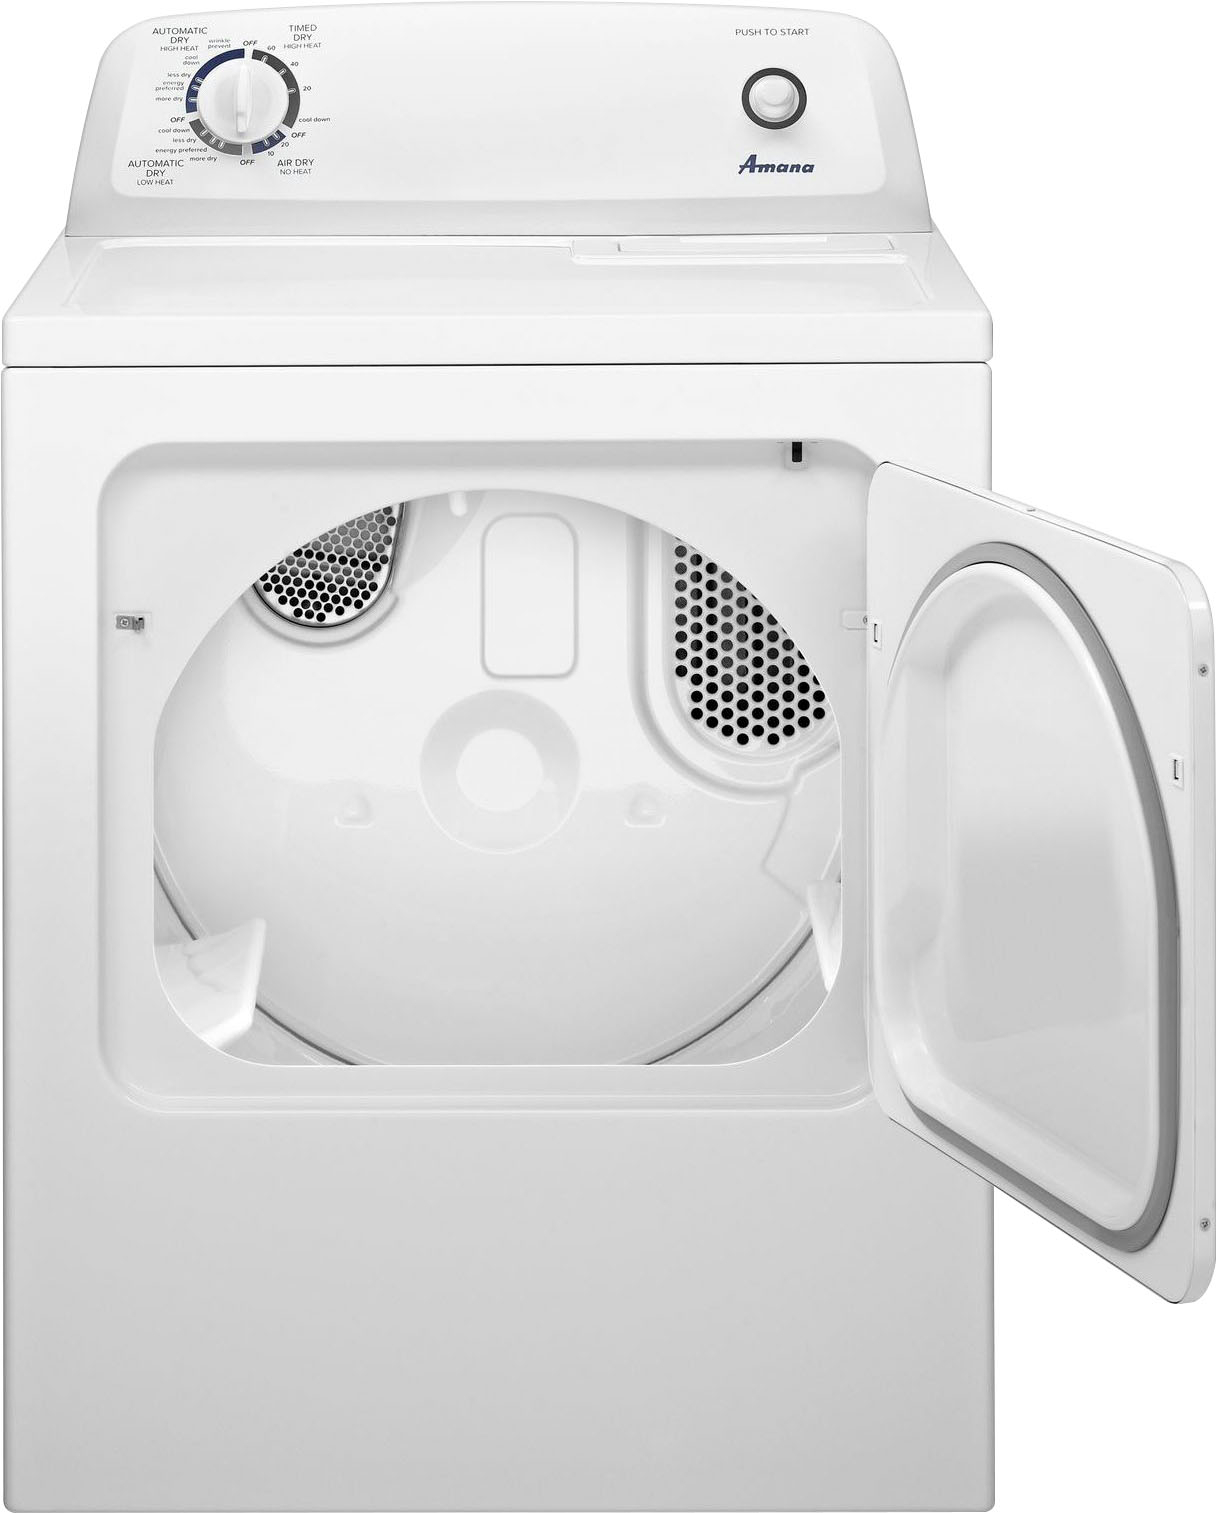 Angle View: Amana - 7.4 Cu. Ft. Stackable Gas Dryer with Sensor Drying - White